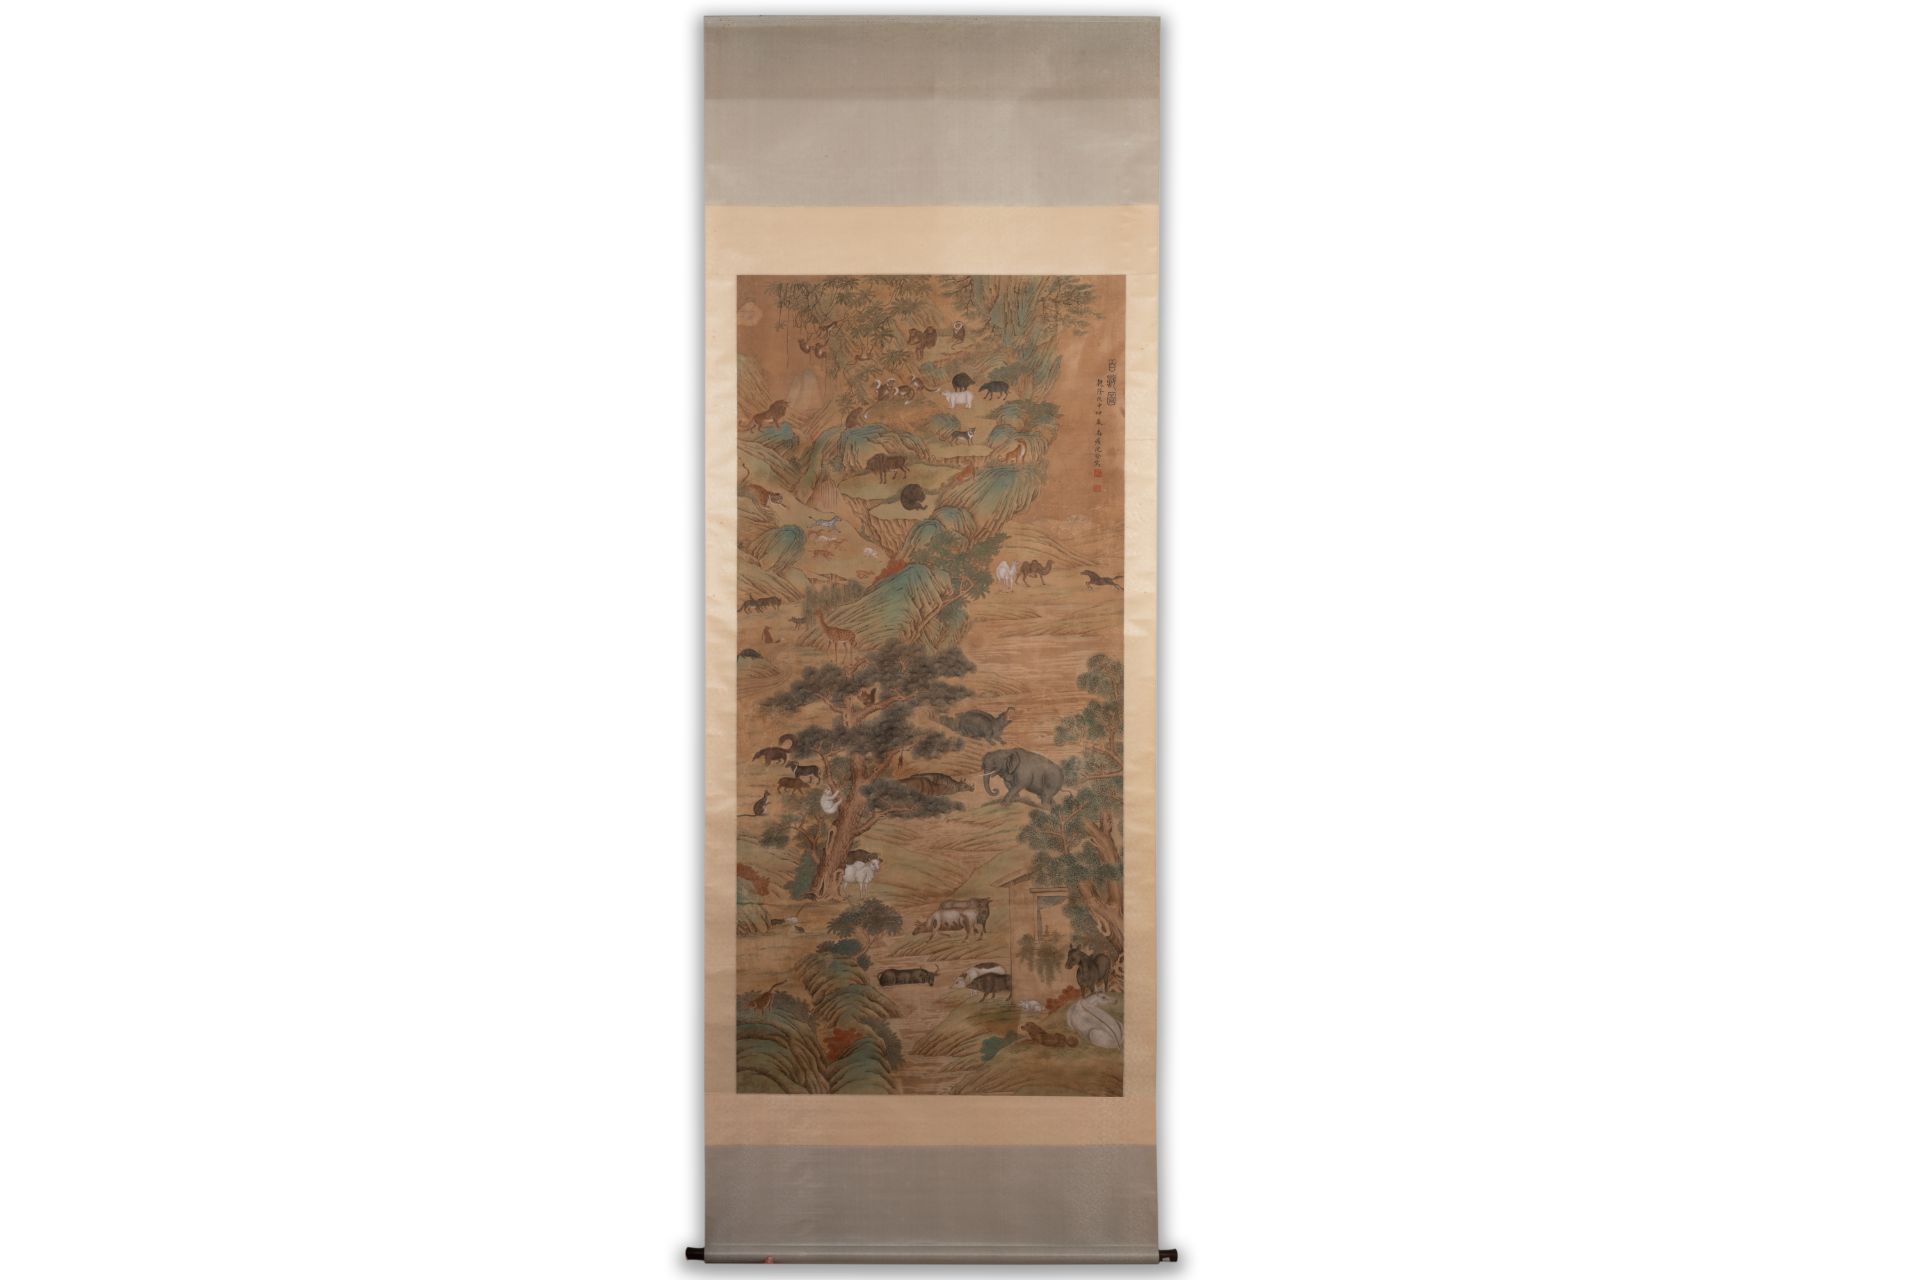 Shen Quan æ²ˆé“¨ (1682-1760): 'Animals in the mountain', ink and colour on silk, dated 1728